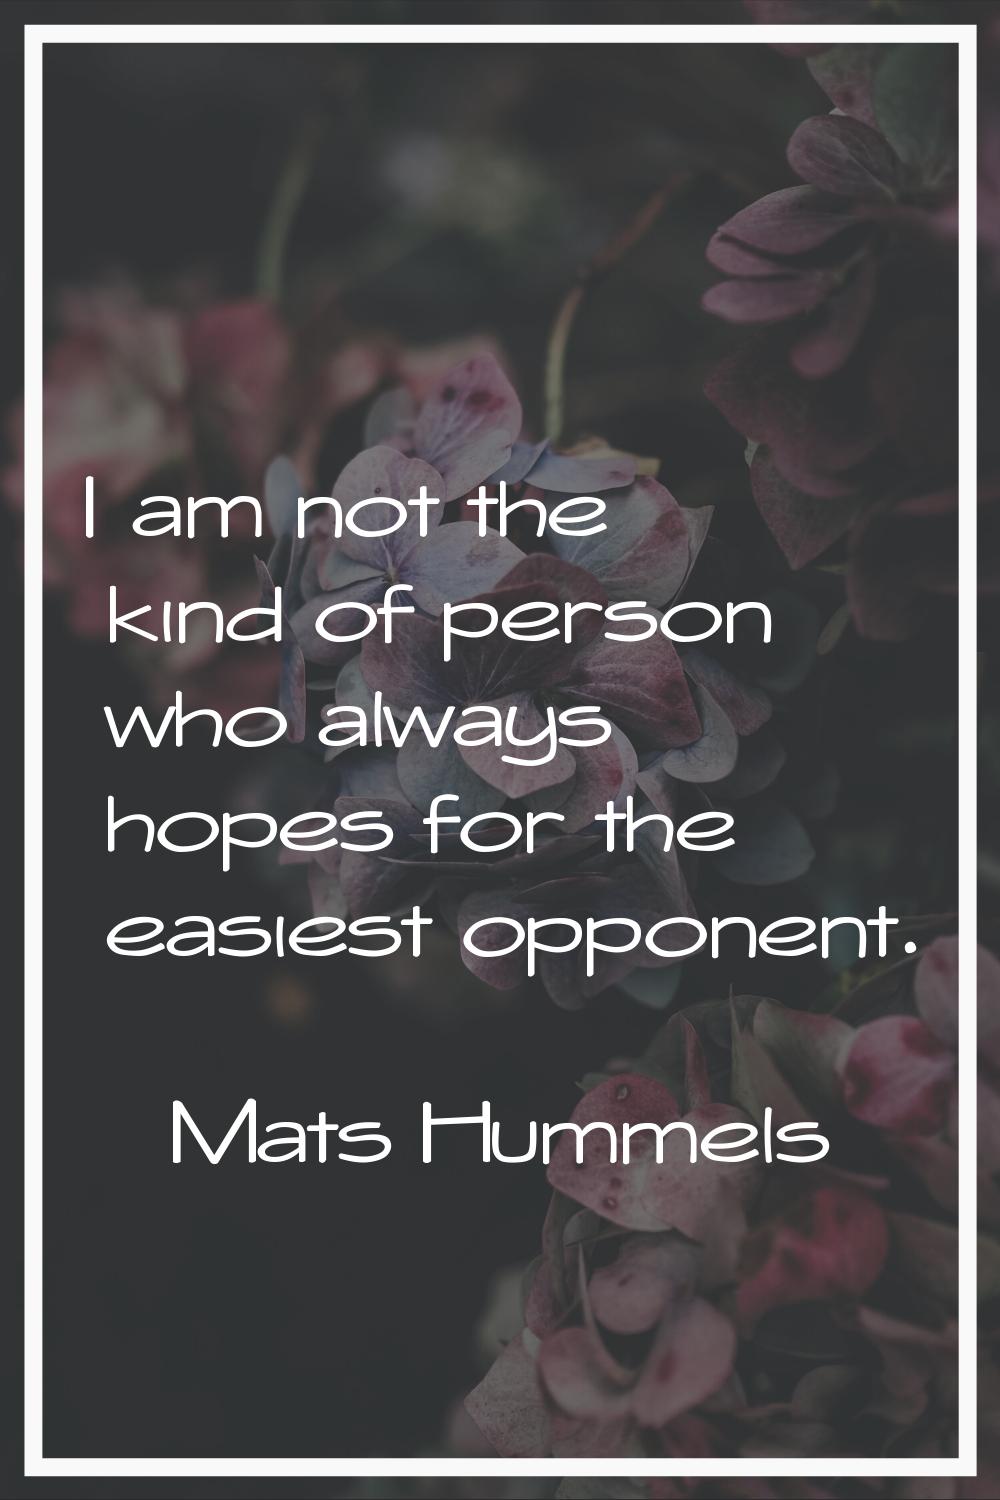 I am not the kind of person who always hopes for the easiest opponent.